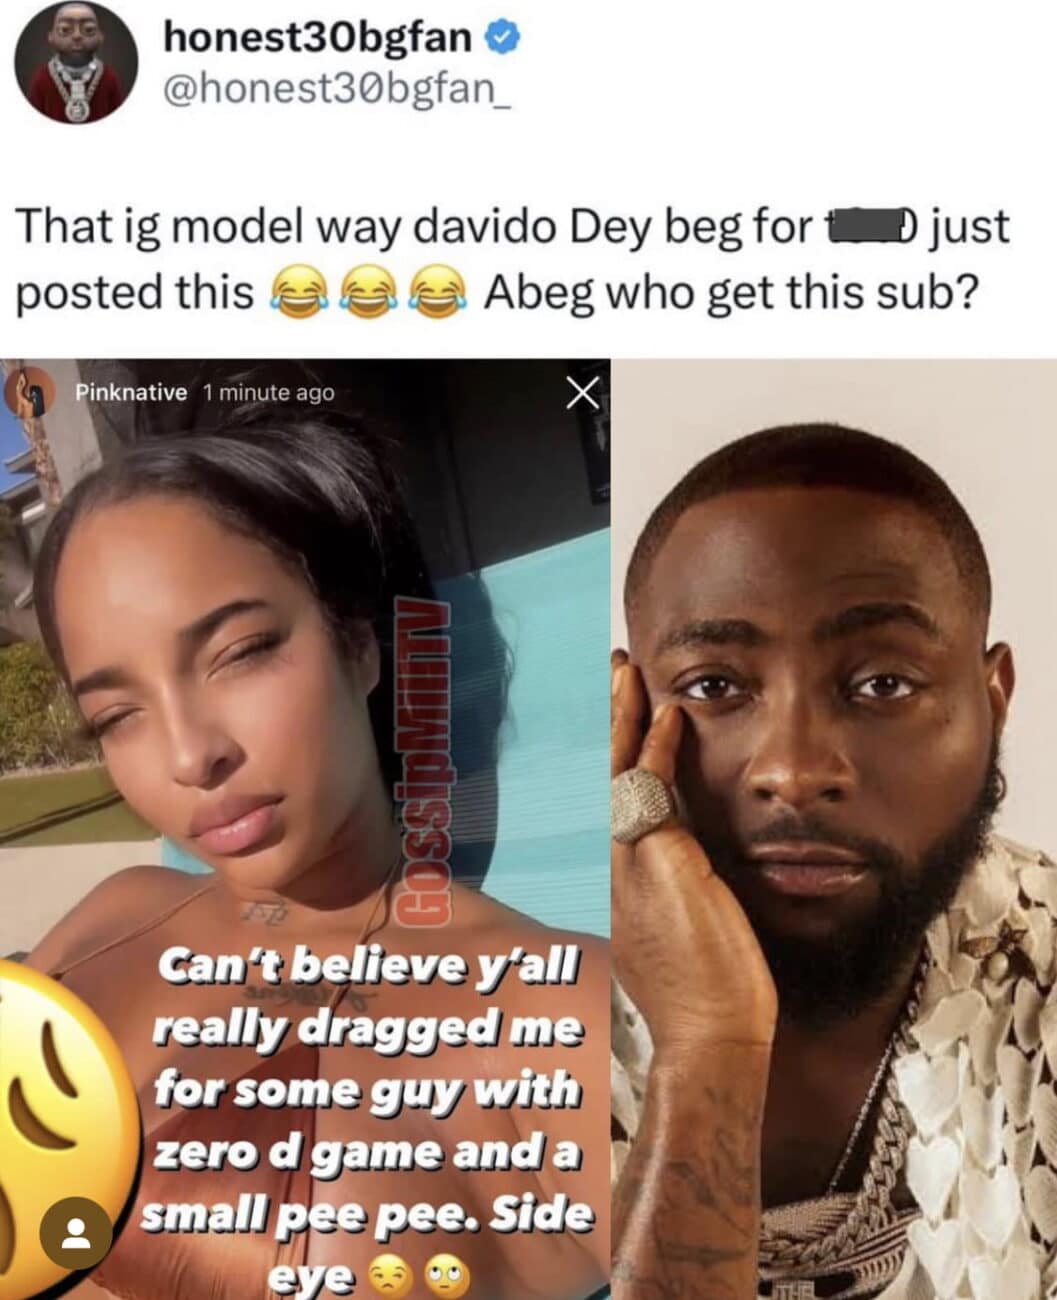 Davido’s ex-girlfriend taunts him for having a small ‘pee pre’.